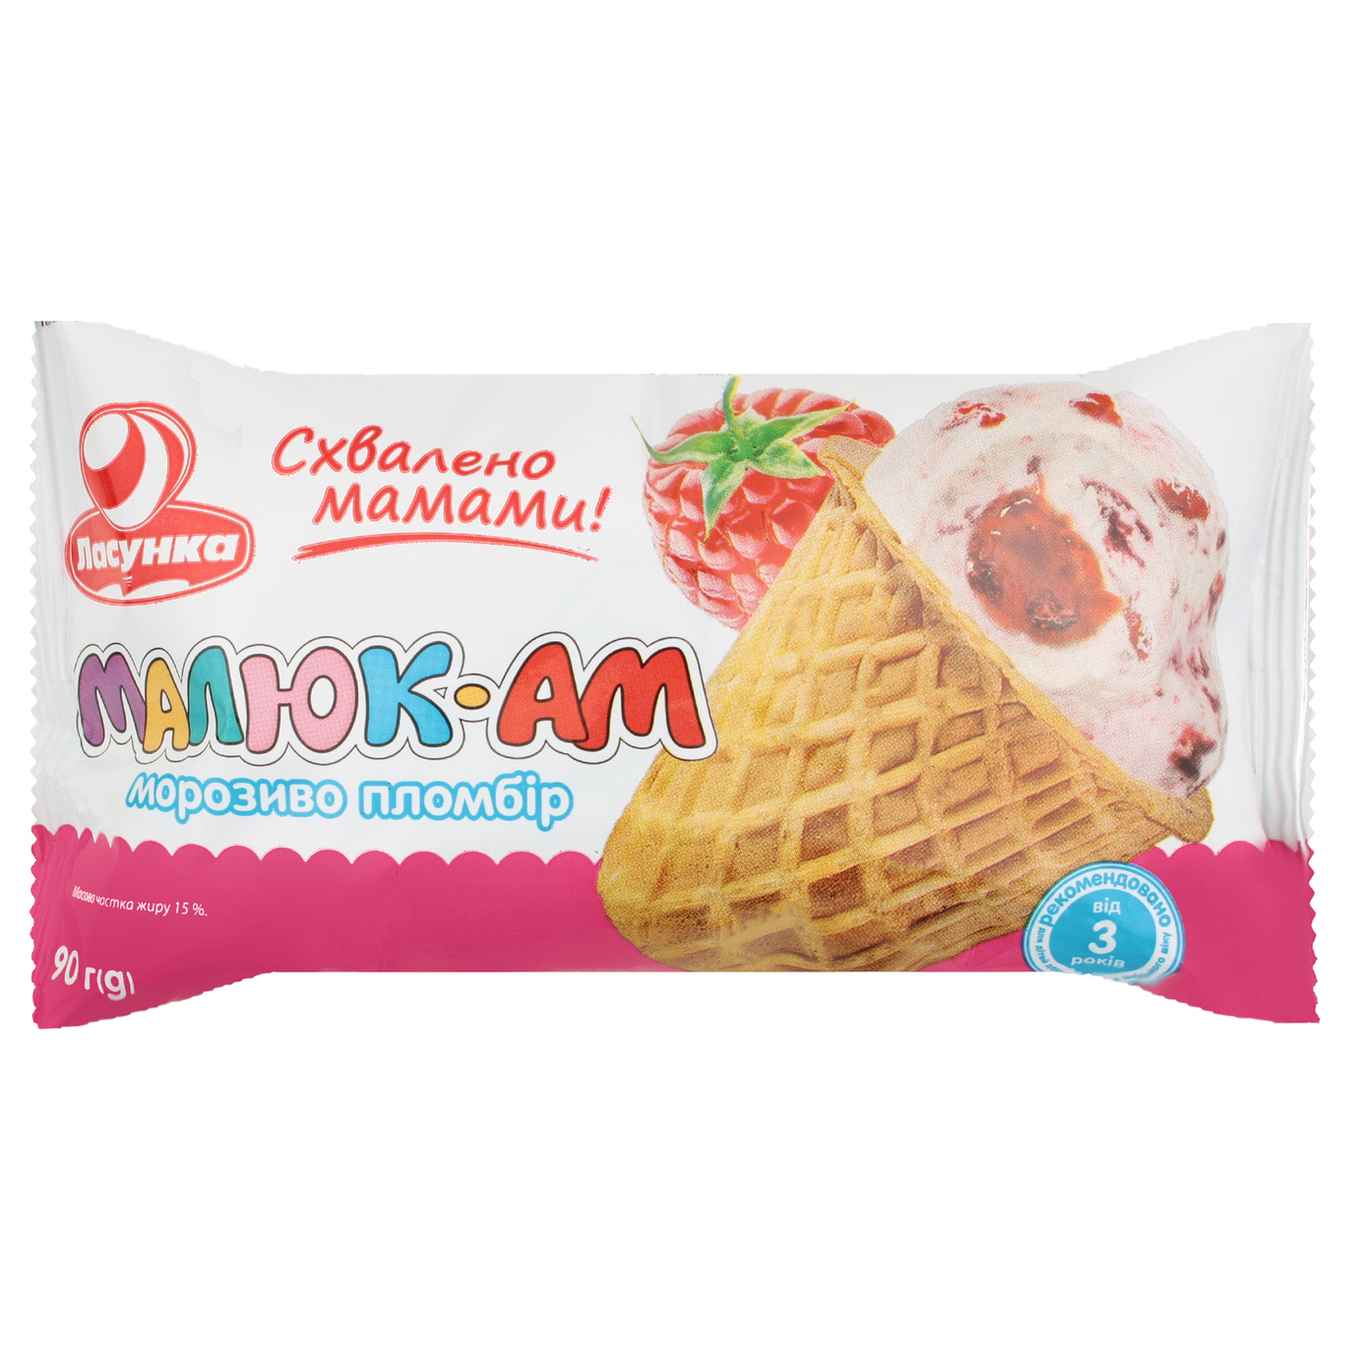 Malyuk-Am ice cream filled with raspberries in a waffle sugar cup 15% 90g